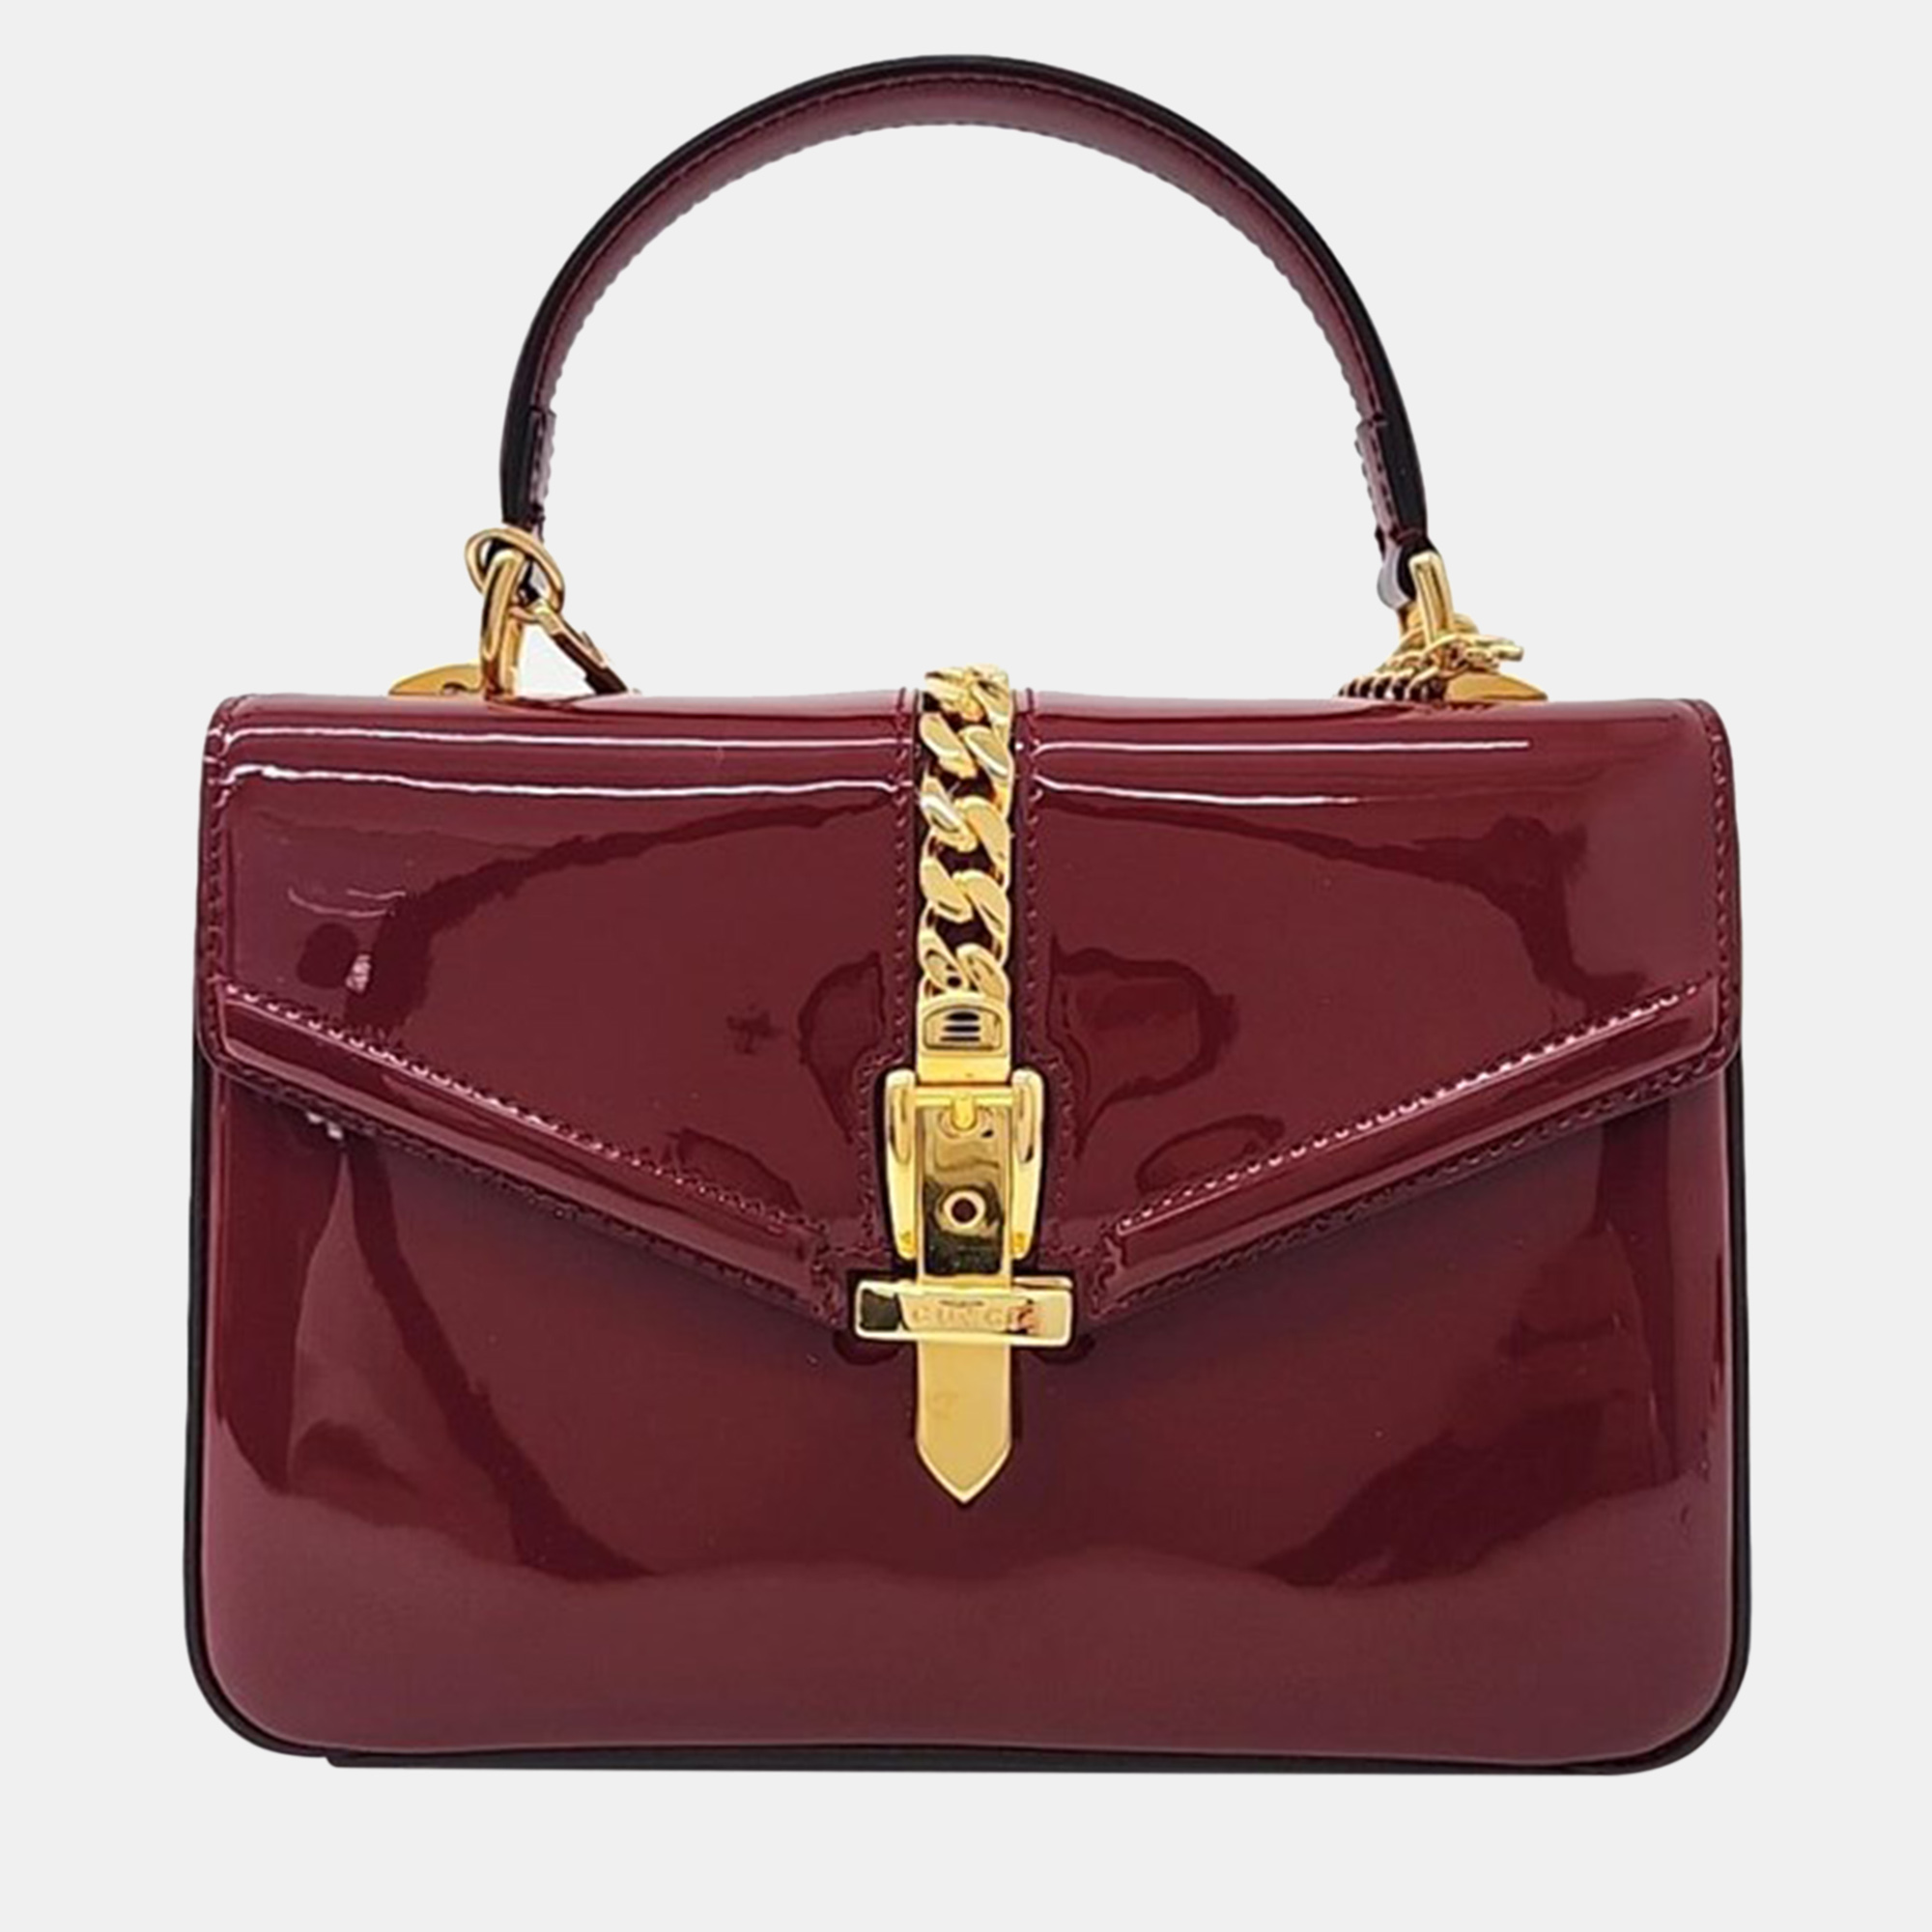 Gucci red patent leather sylvie 1969 mini top handle bag